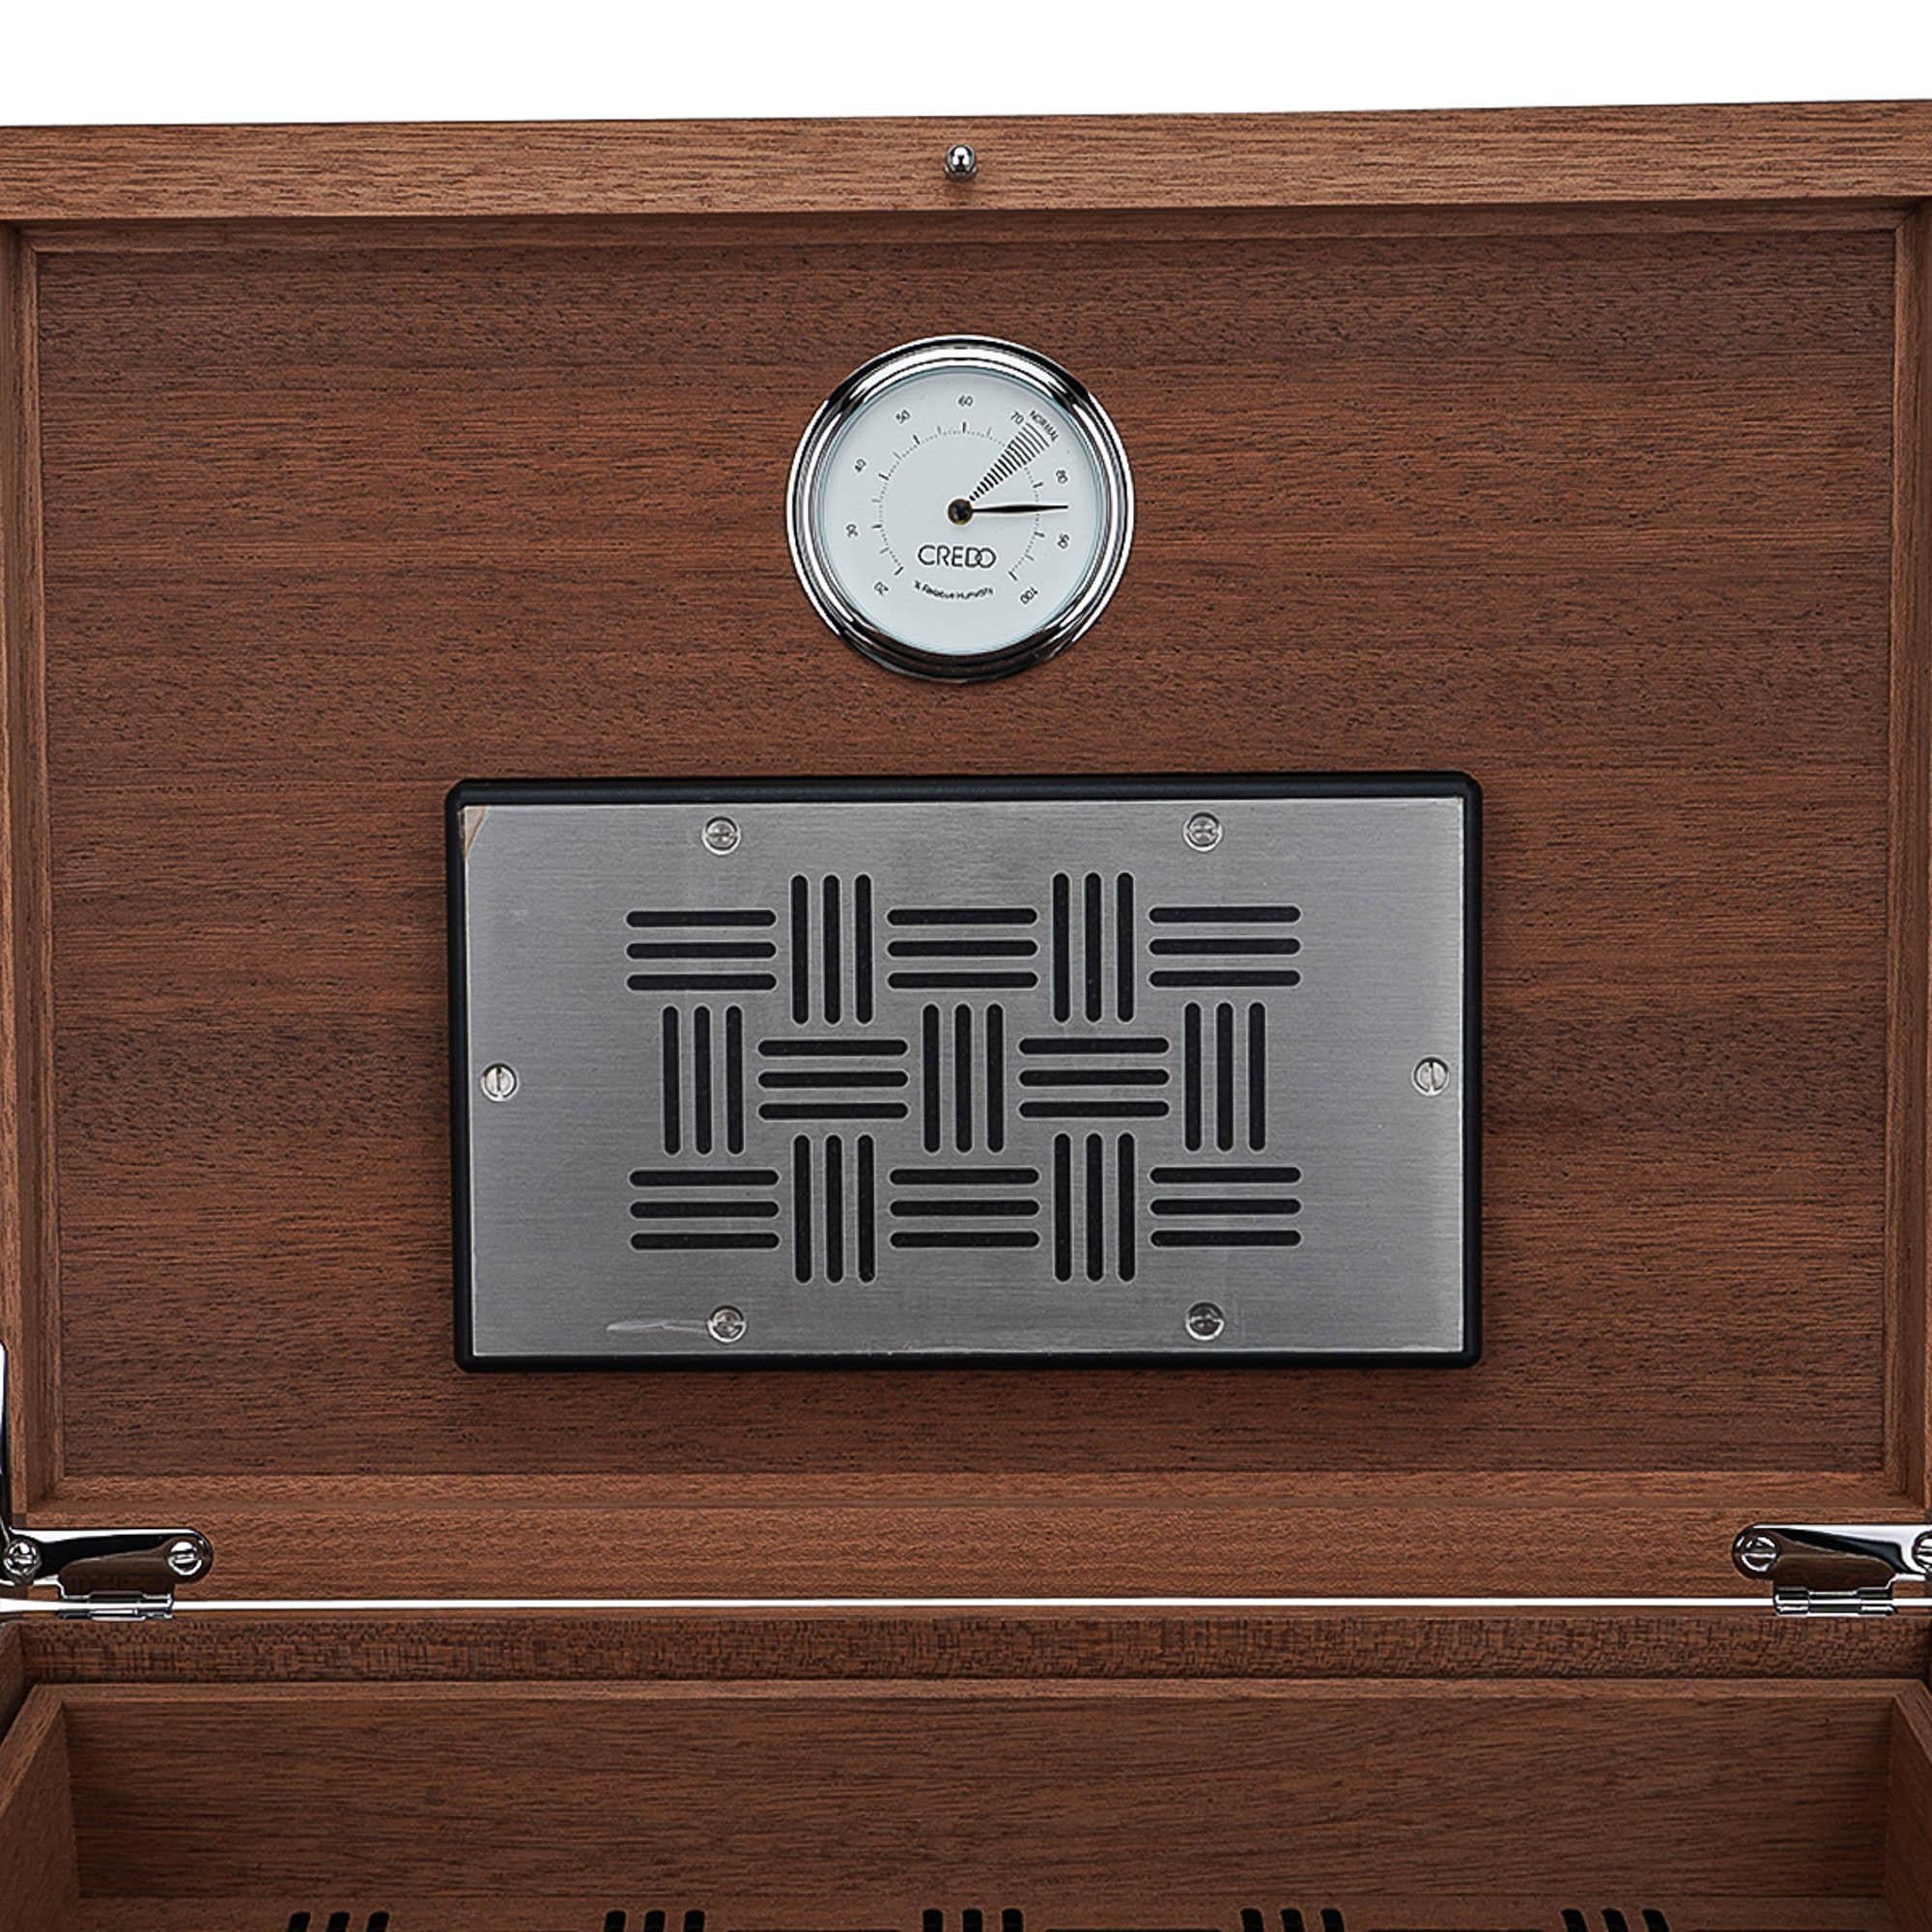 Hermes Coffret a Cigares Humidor Limited Edition Sycamore Holz Sesam Eidechse im Angebot 11